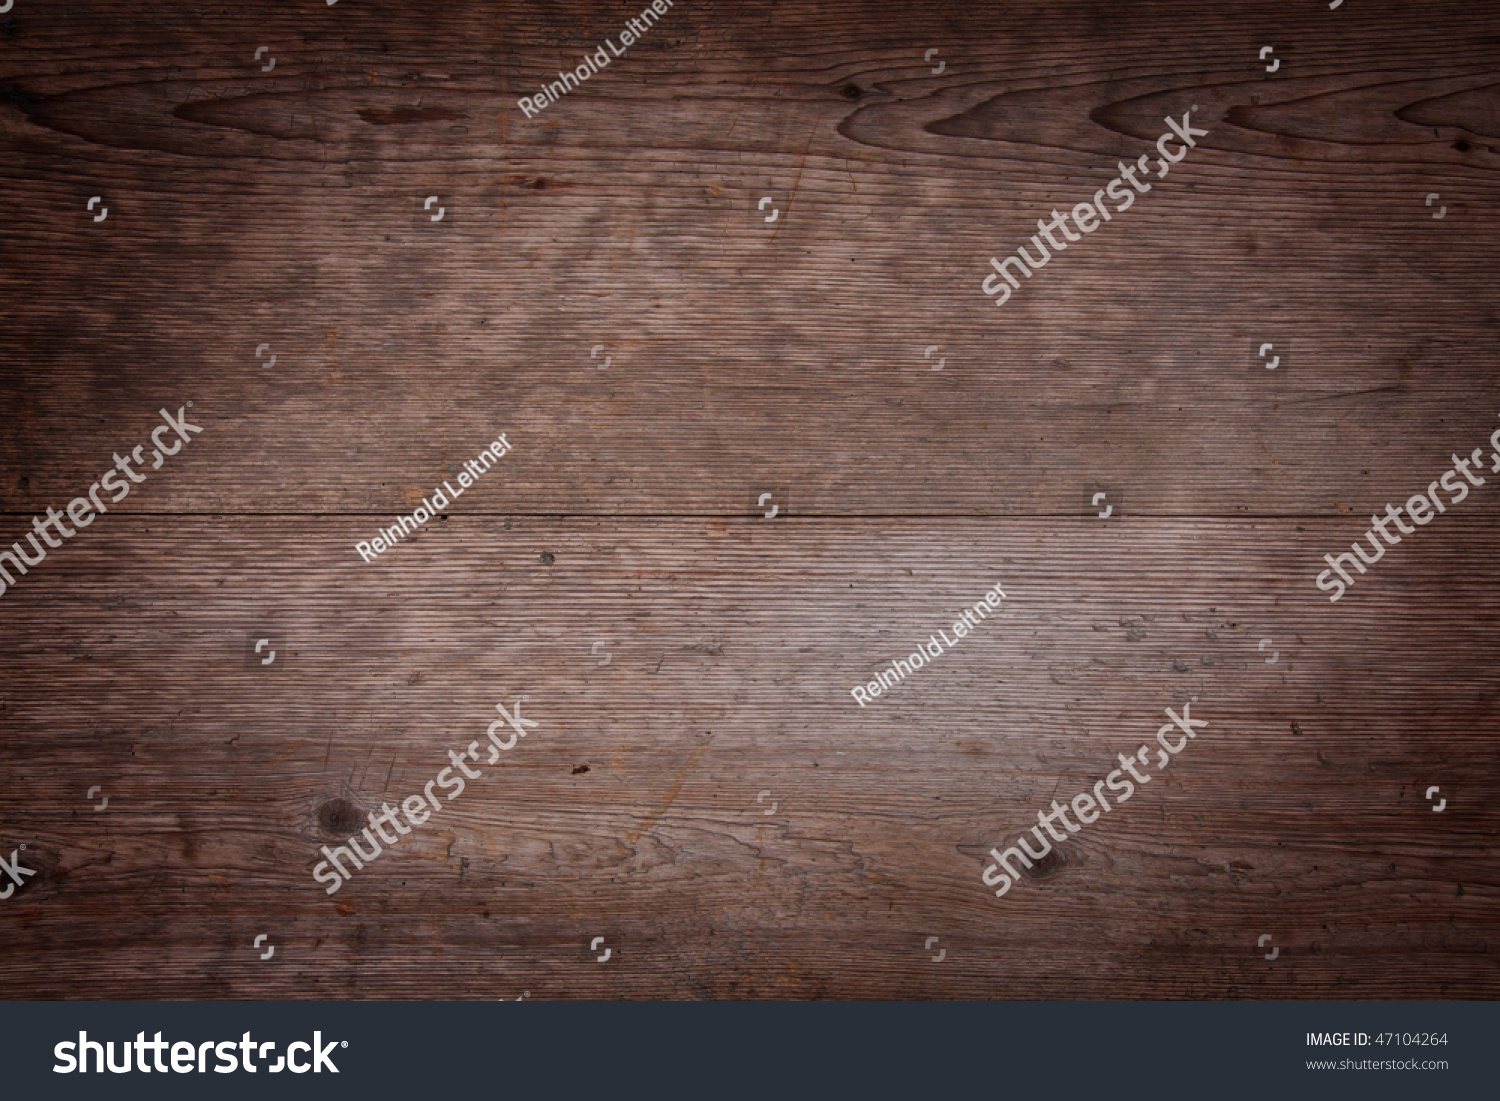 old, grunge wooden wall #47104264